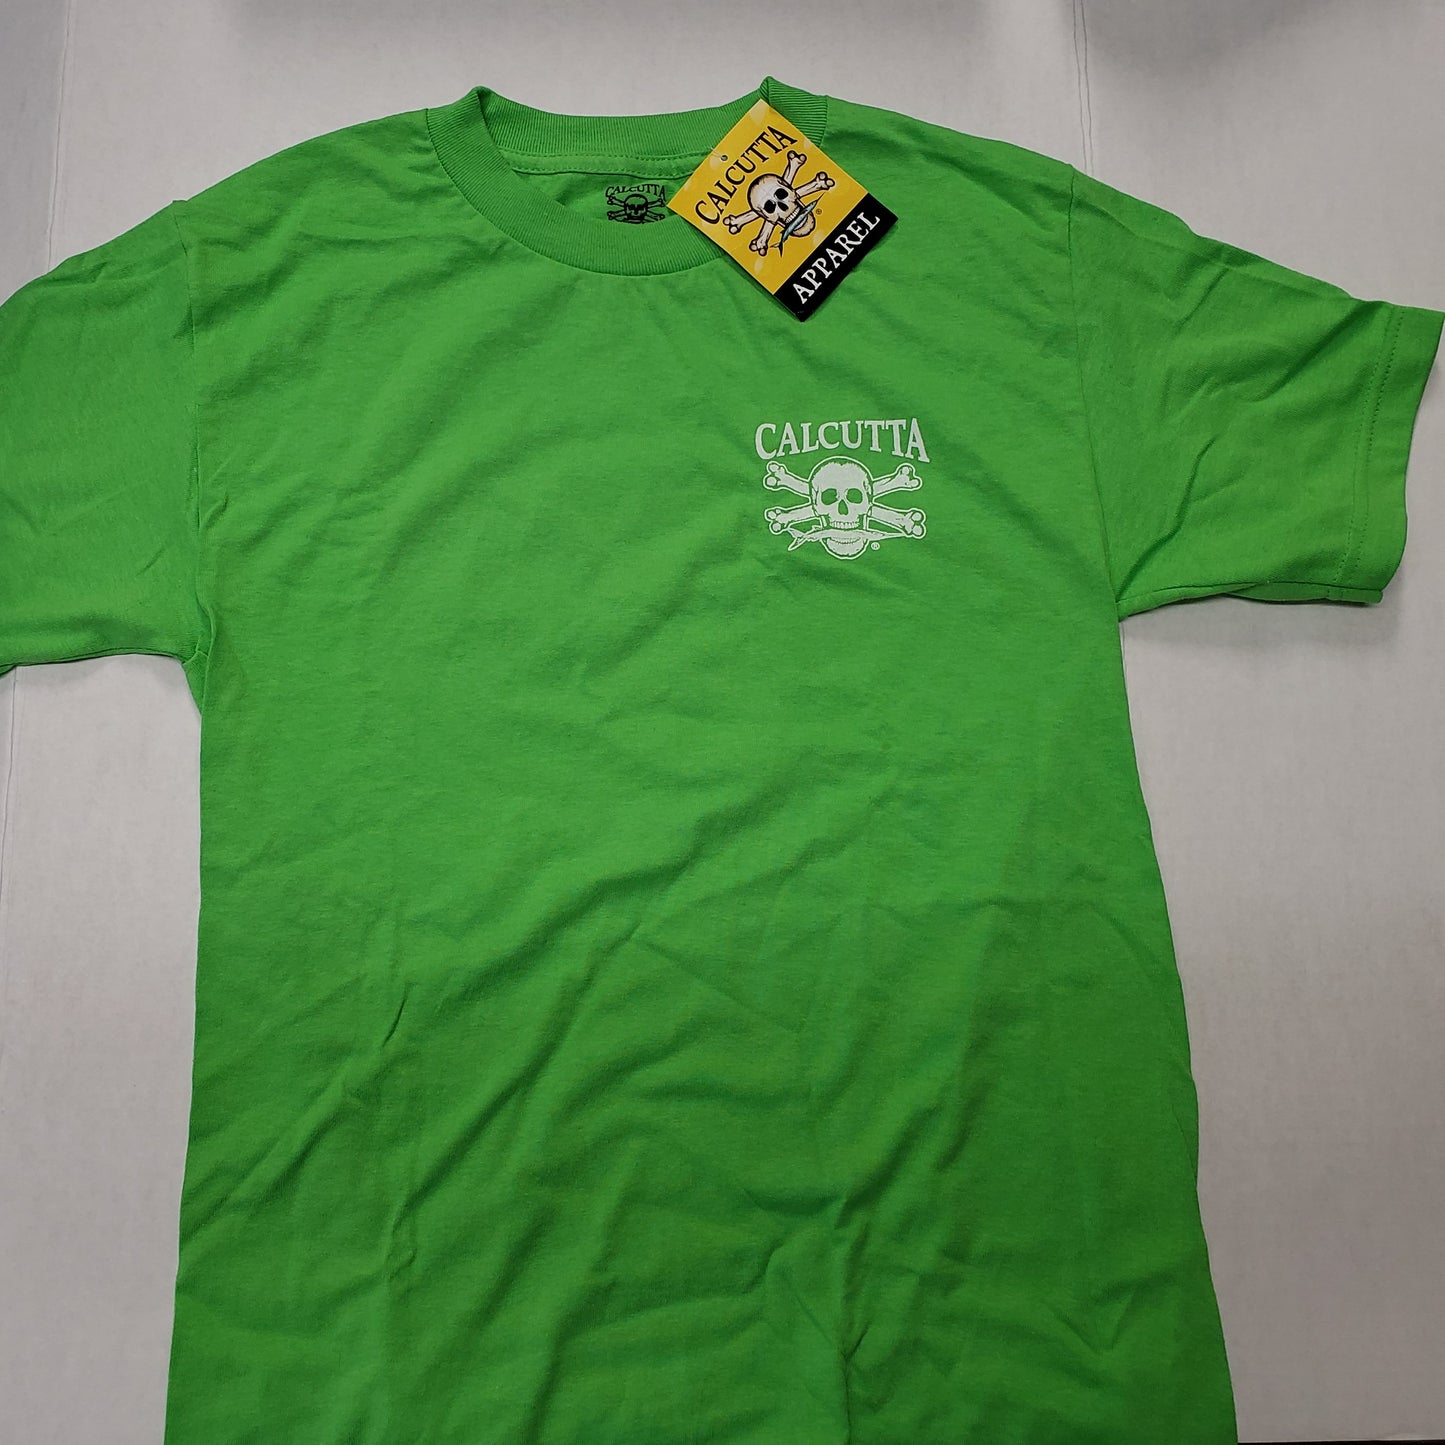 New Authentic Calcutta Short Sleeve Shirt Lime Green/ White Logo Front and Back with P.I.T.B